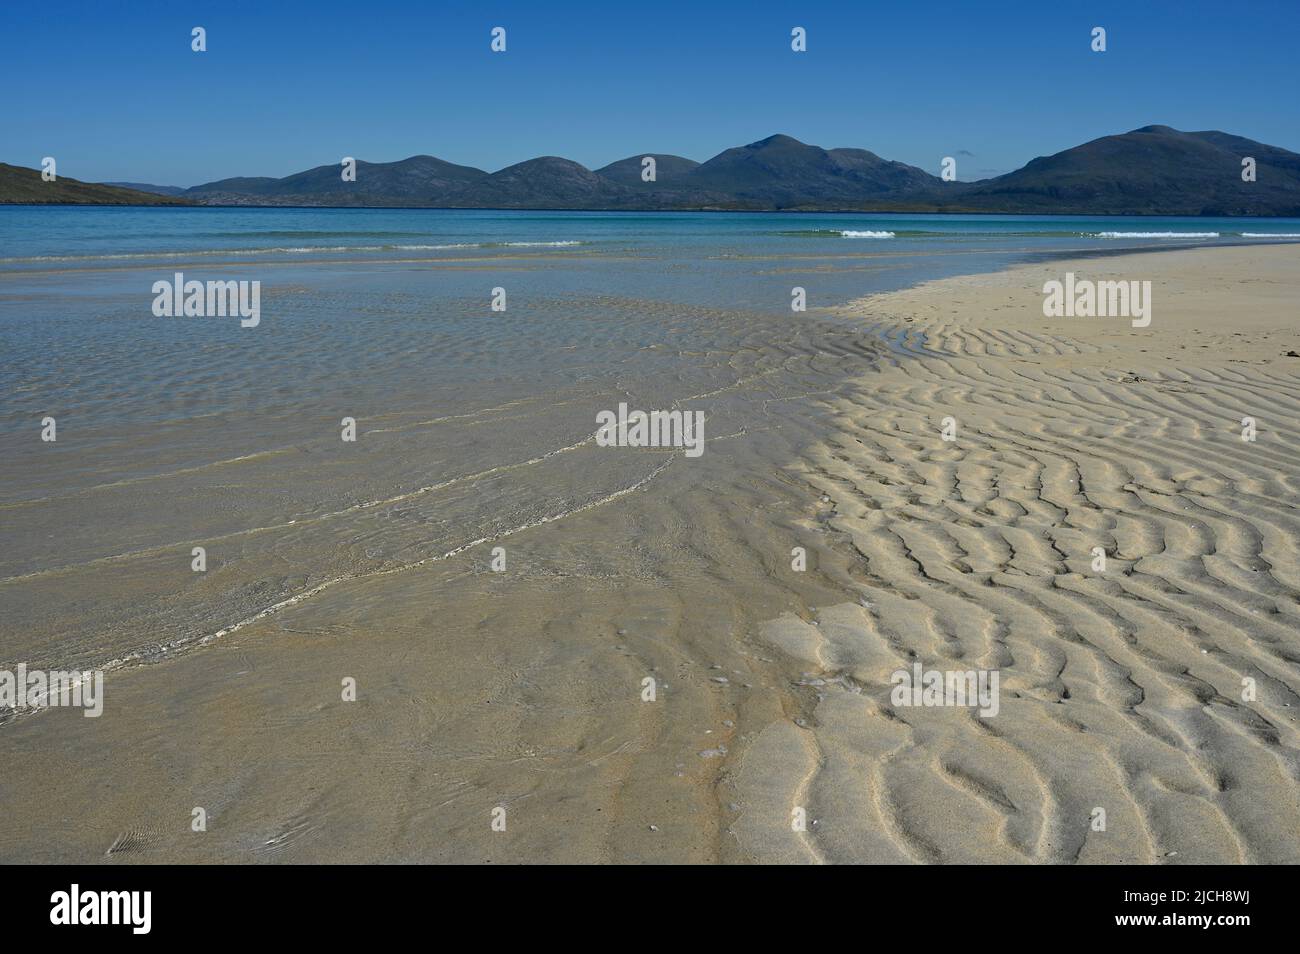 Luskentyre beach, Isle of Harris. Blue sky, mountains in background, sea and wavy lines of sand in foreground. No people. Tranquil, summer scene. Stock Photo